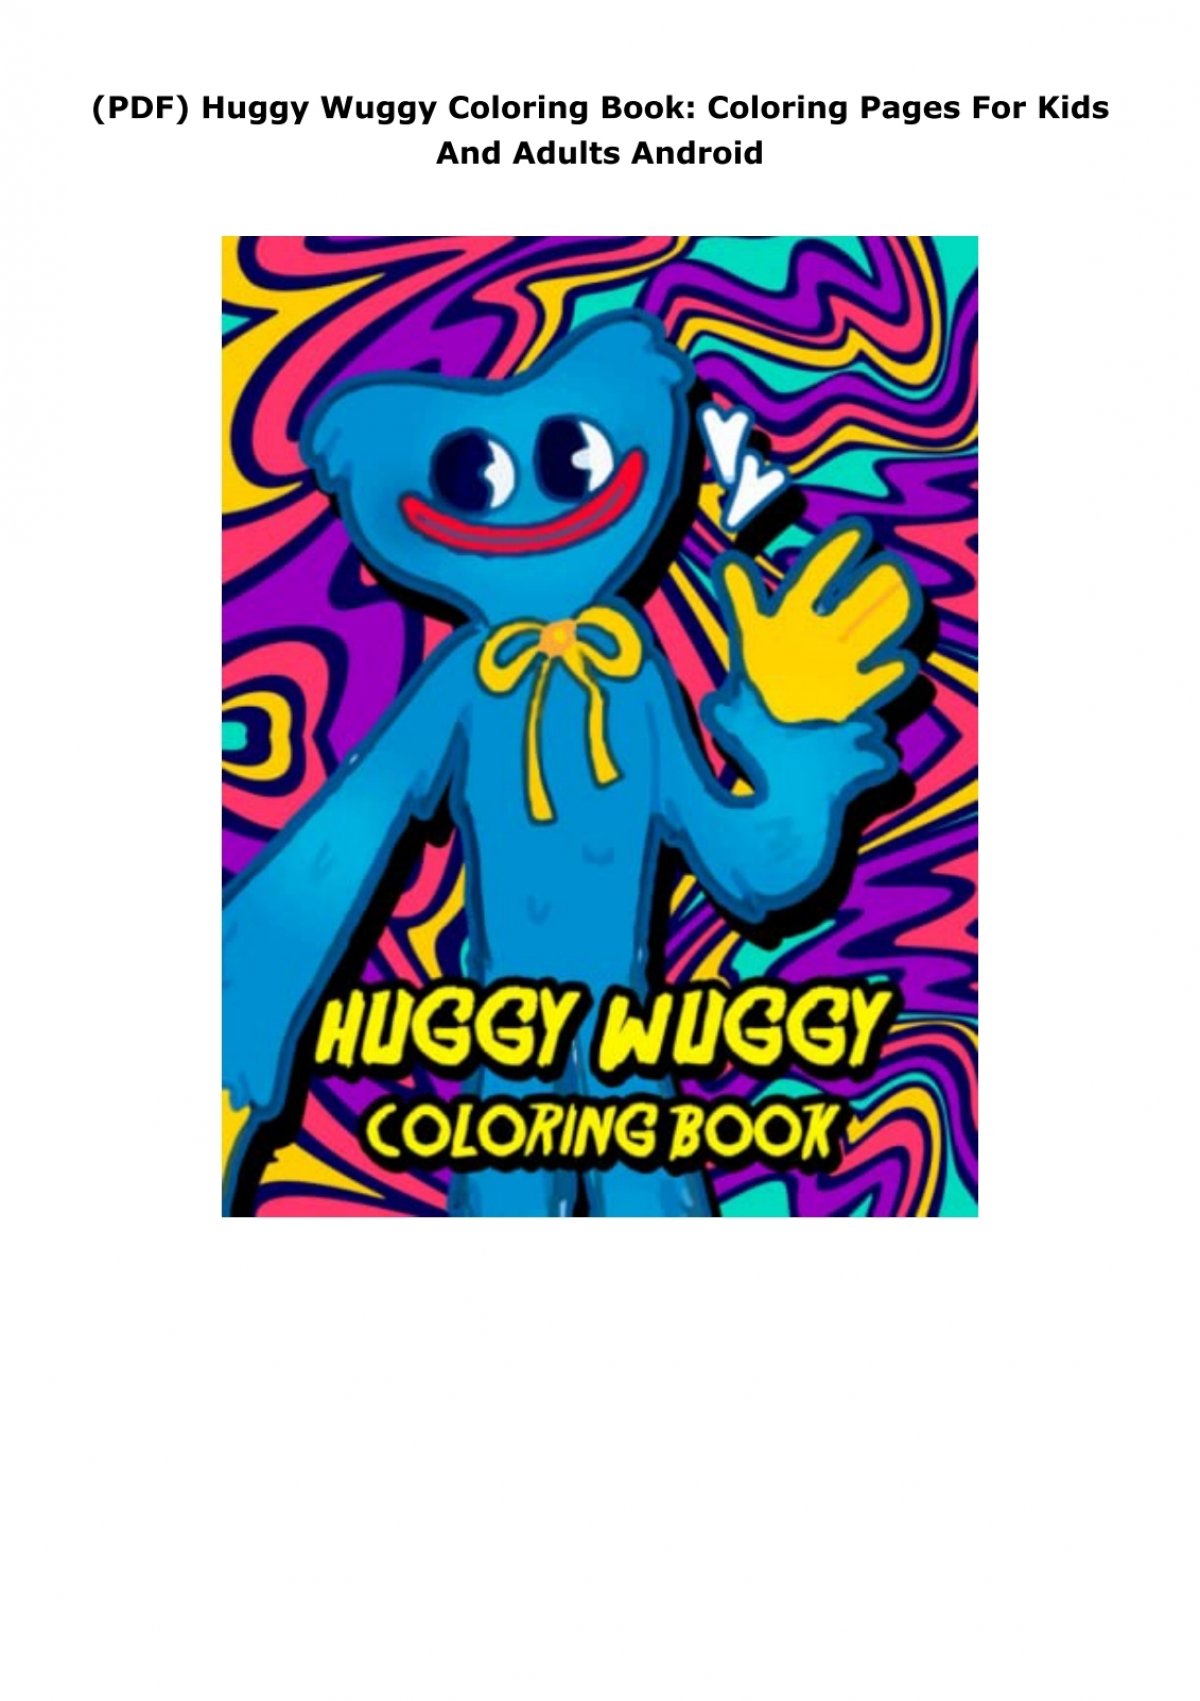 Huggy wuggy coloring book